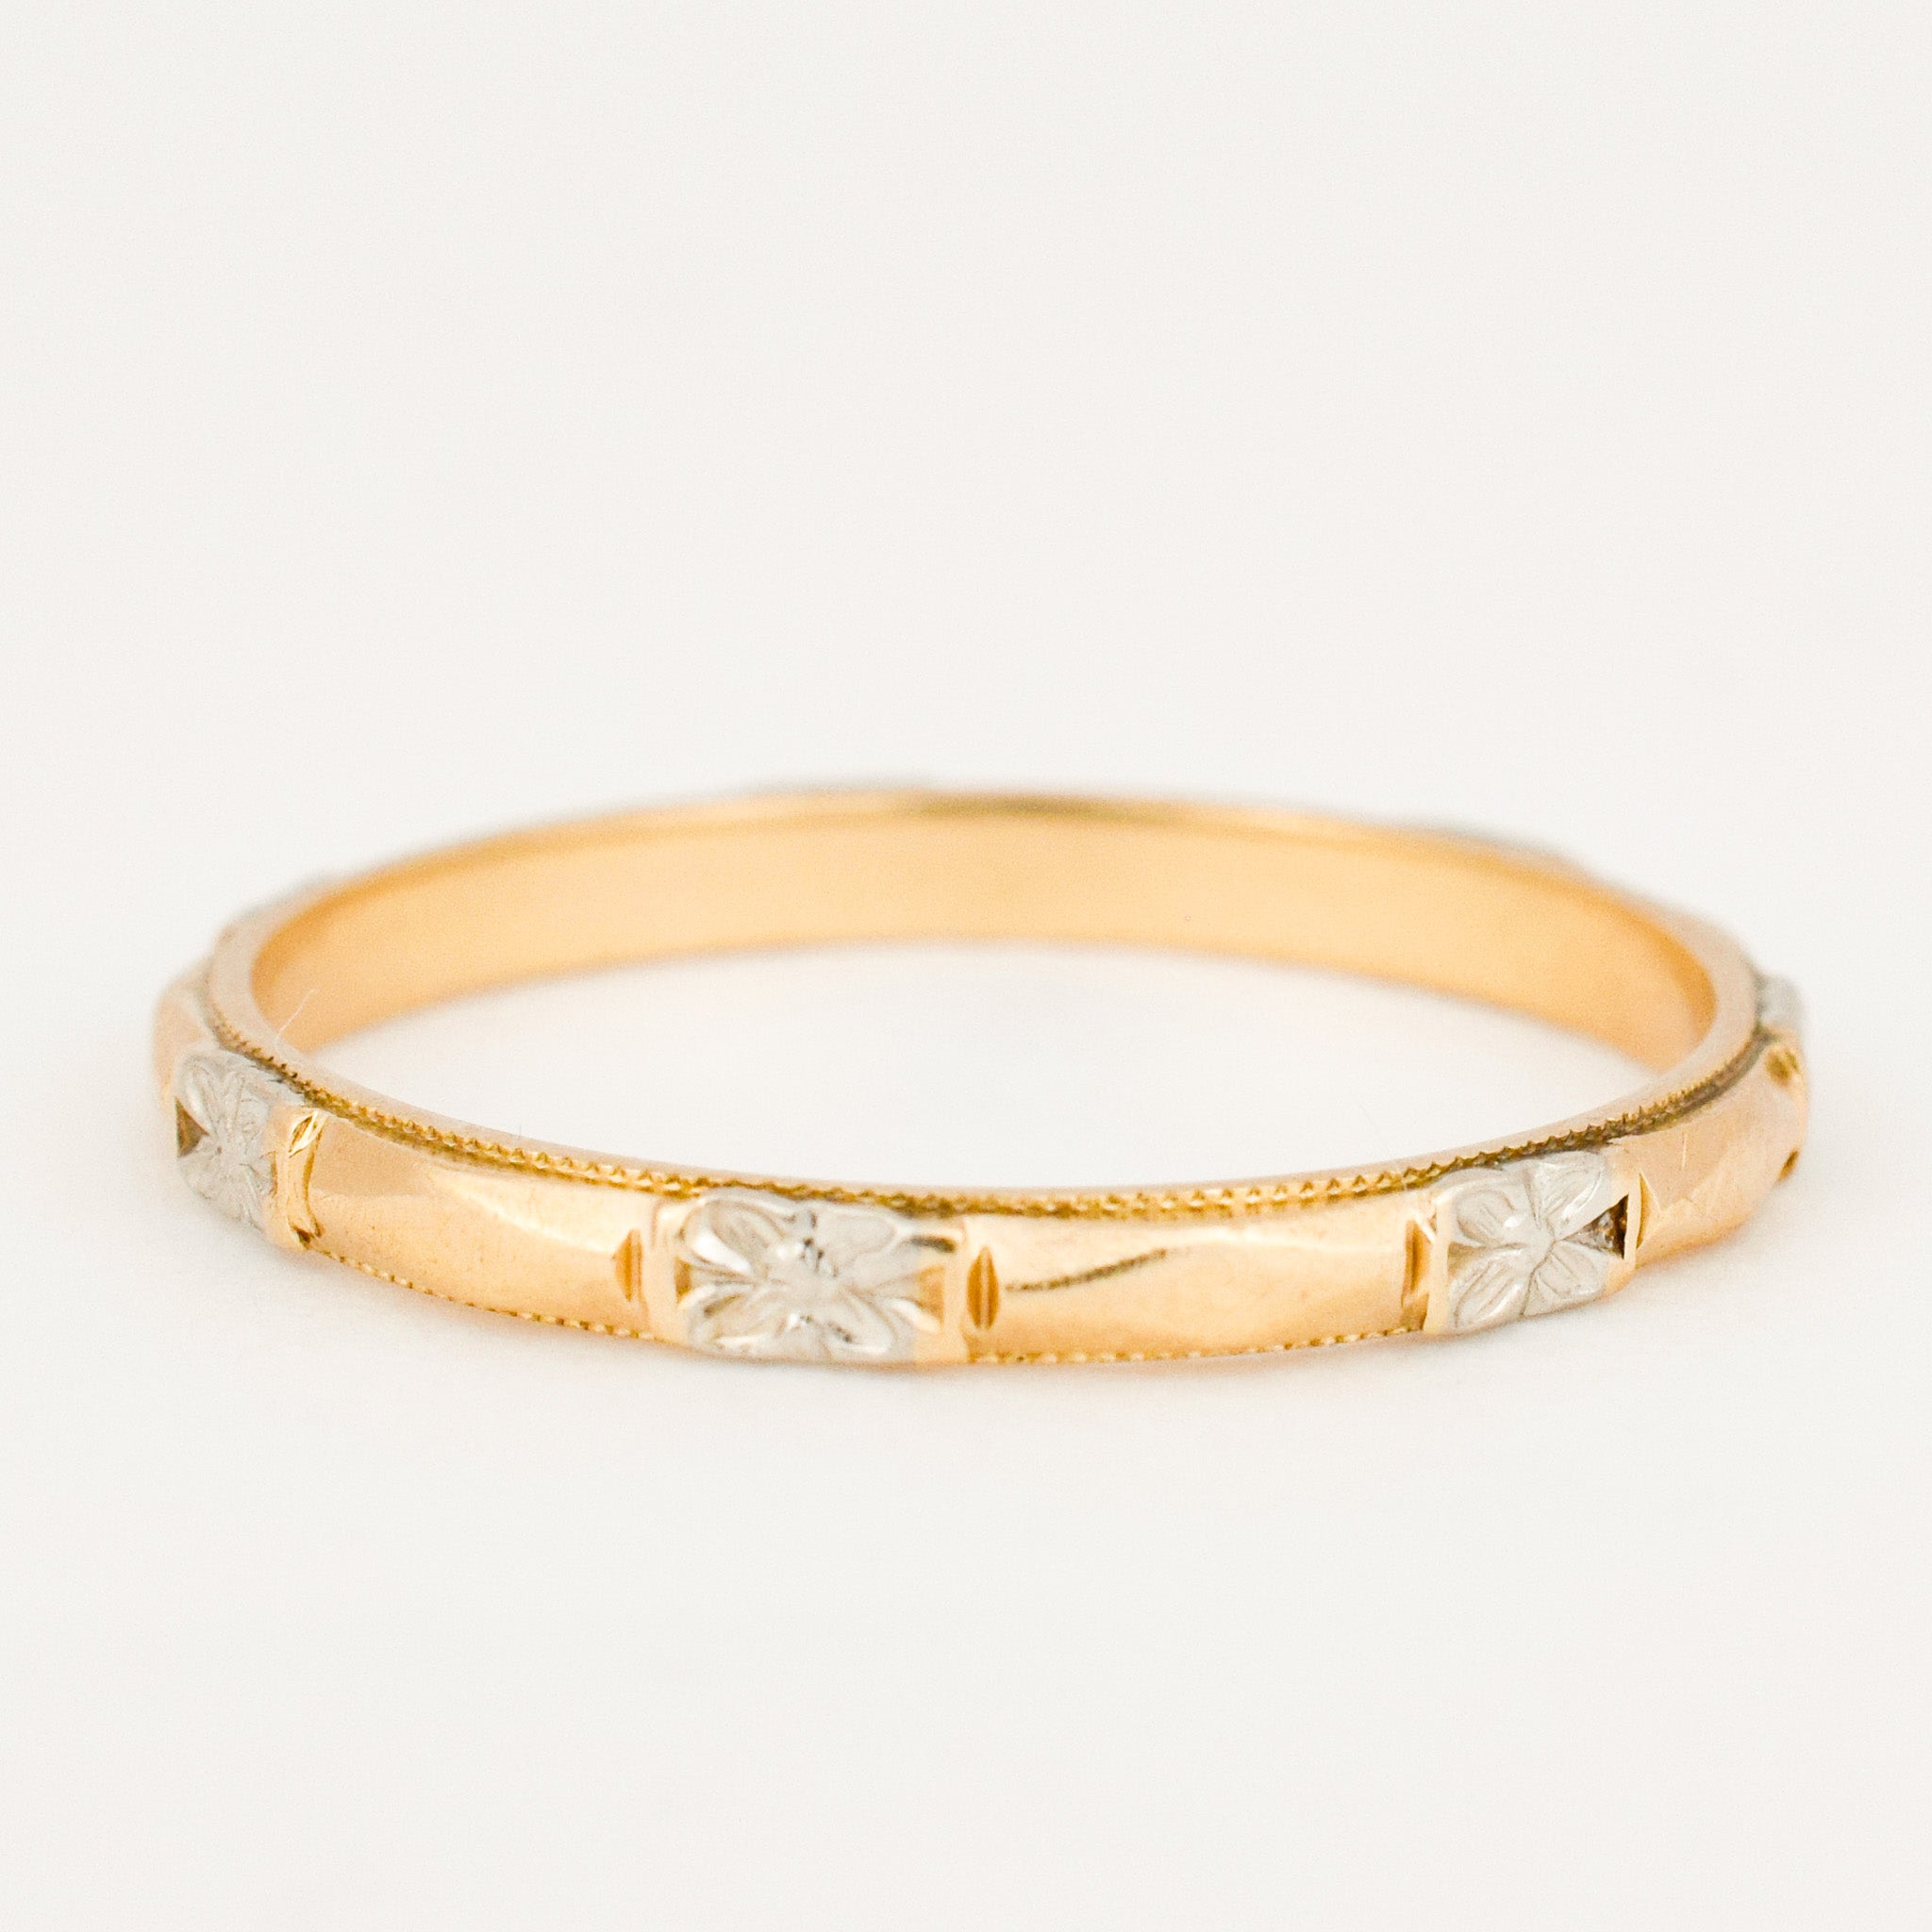 Two-Toned Orange Blossom Gold Band